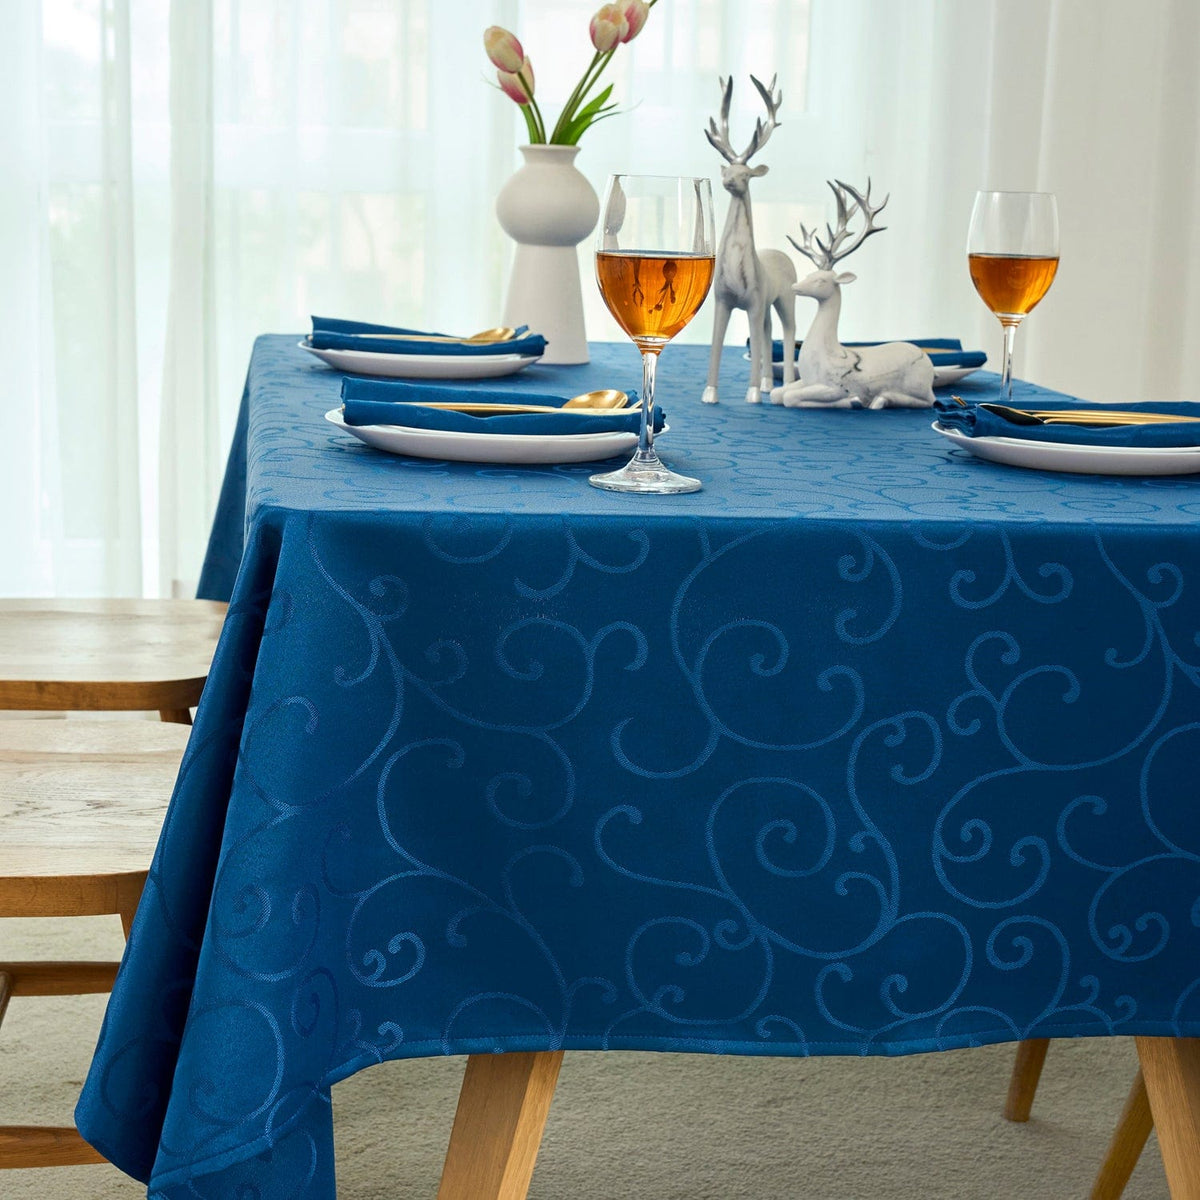 Marina Jacquard Waterproof Thick Premium Solid Damask Kitchen Tablecloth Liquid Repellent and Stain Resistant, Oblong